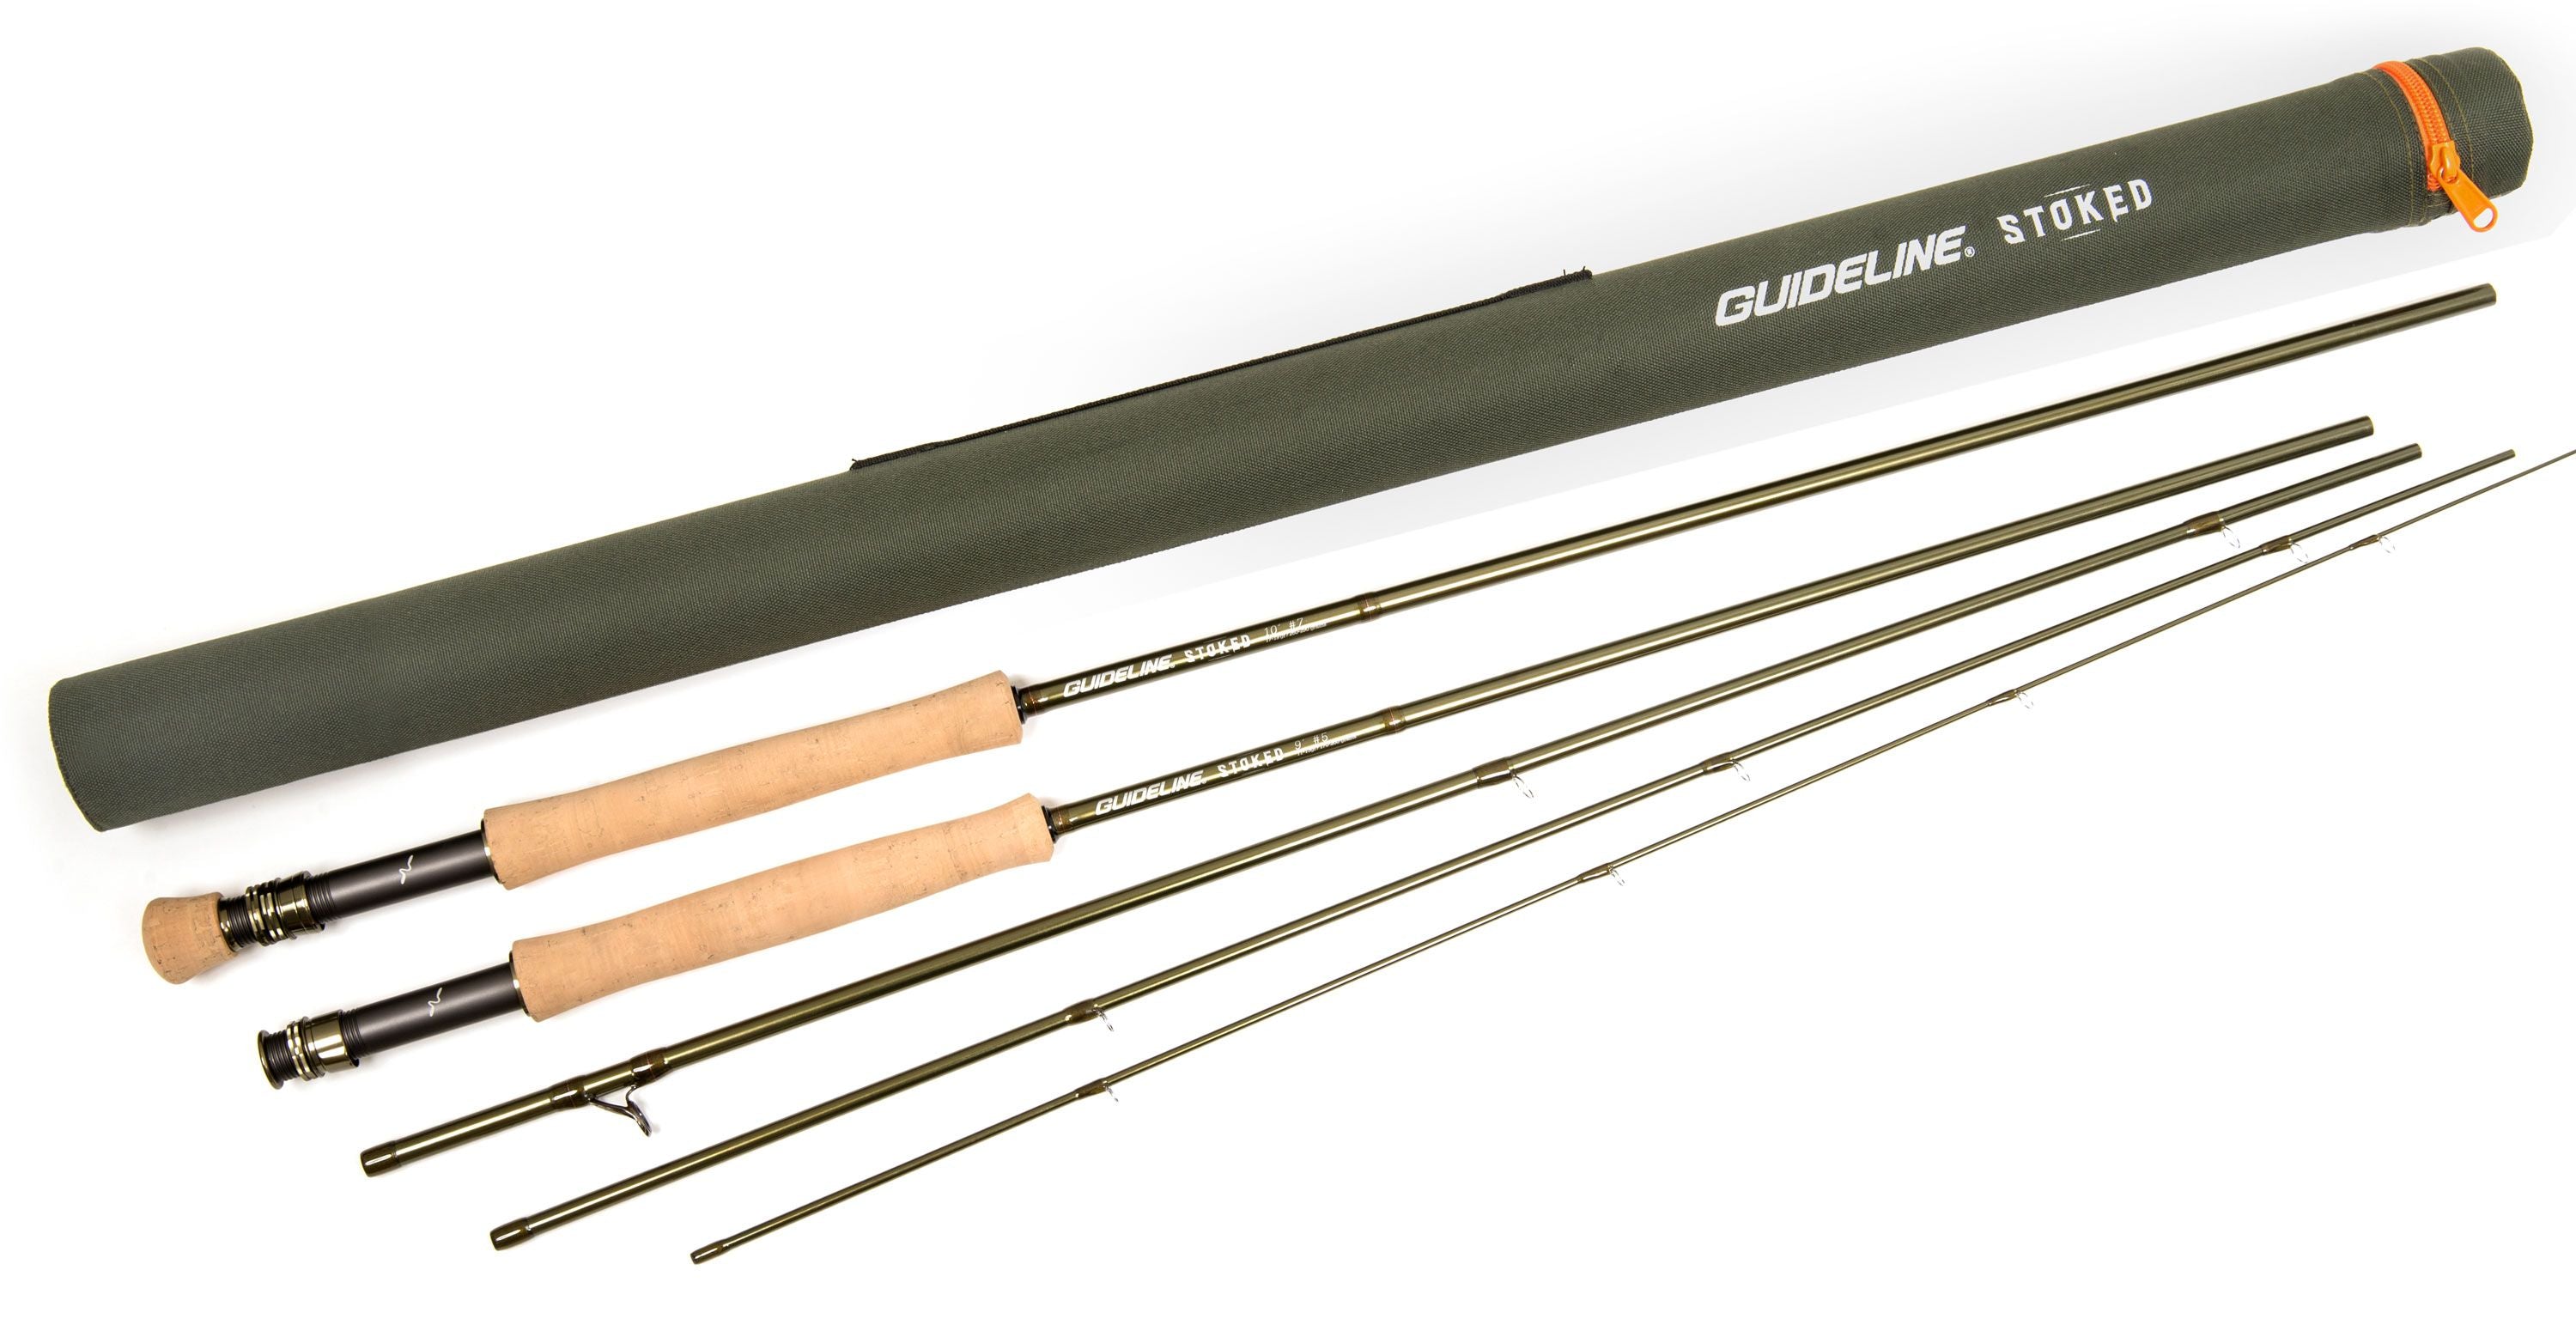 GUIDELINE STOKED 4 PCE FLY ROD - 25% OFF!